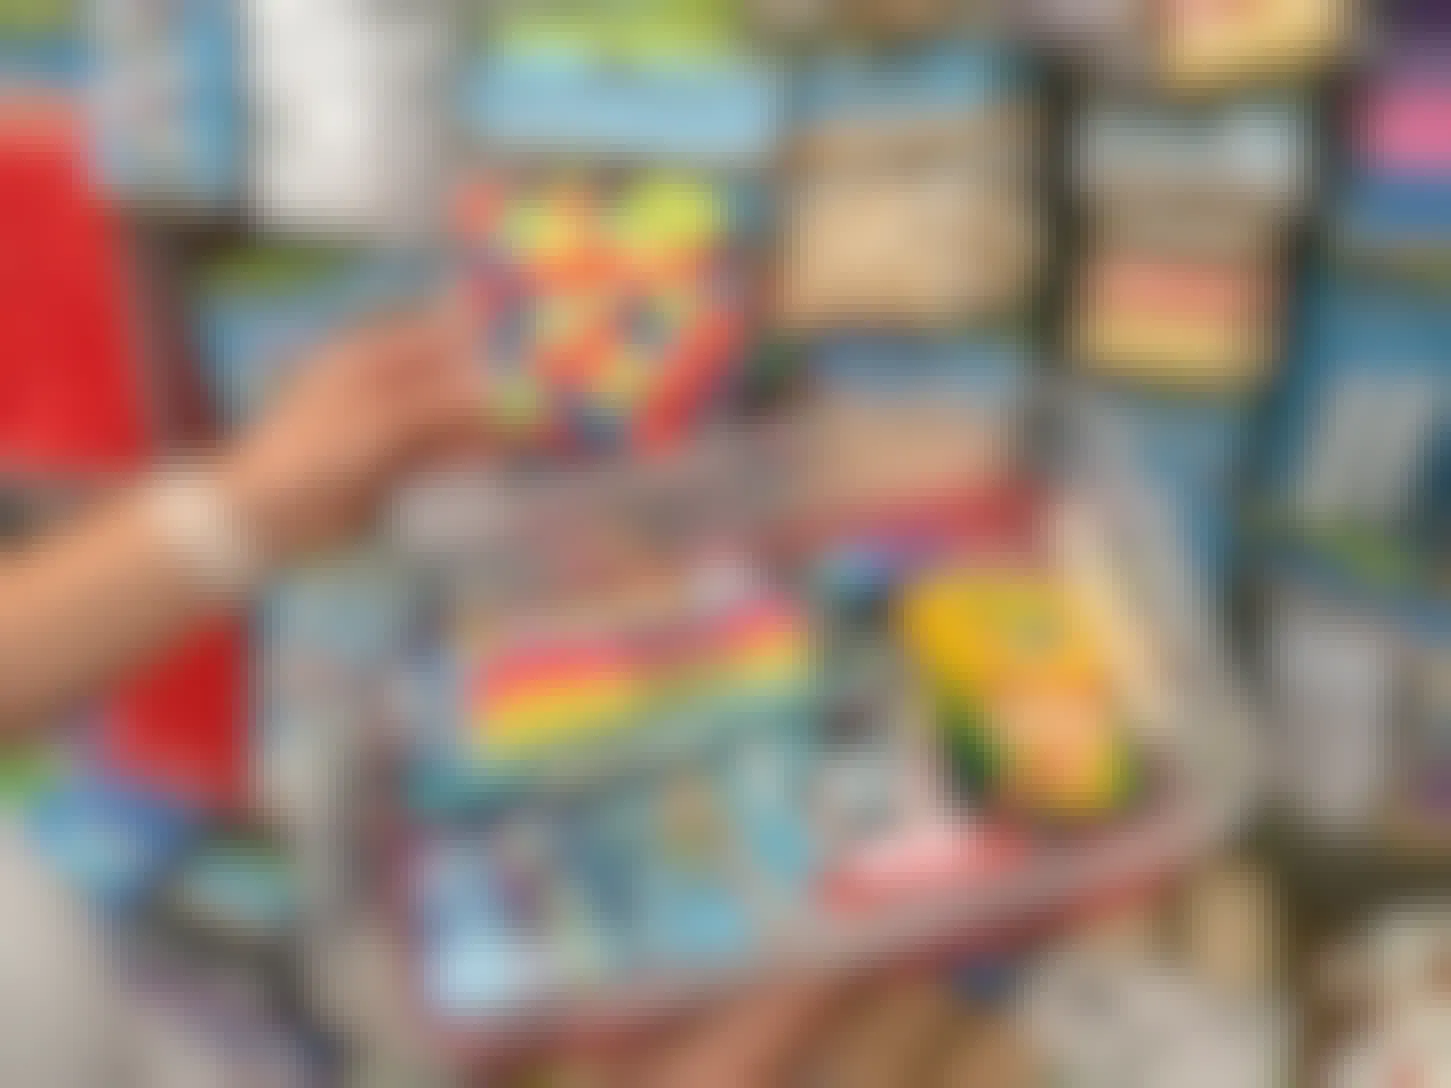 A person's hands holding a tupperware tub filled with art supplies next to a wall of art and craft supplies at a store.